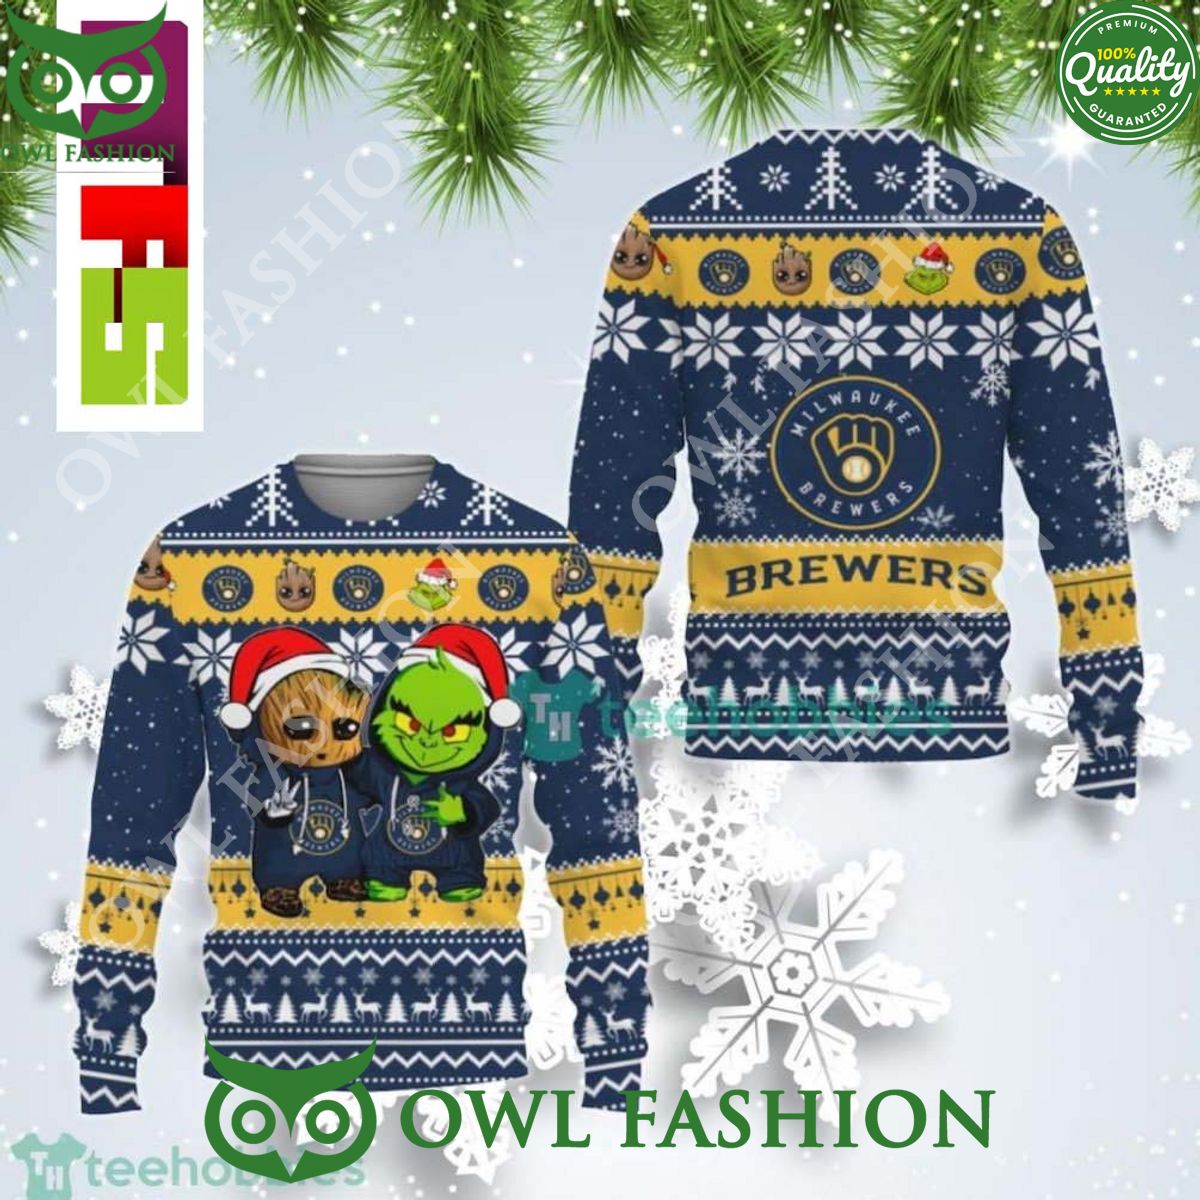 25 best ugly Christmas sweaters for the 2023 holidays